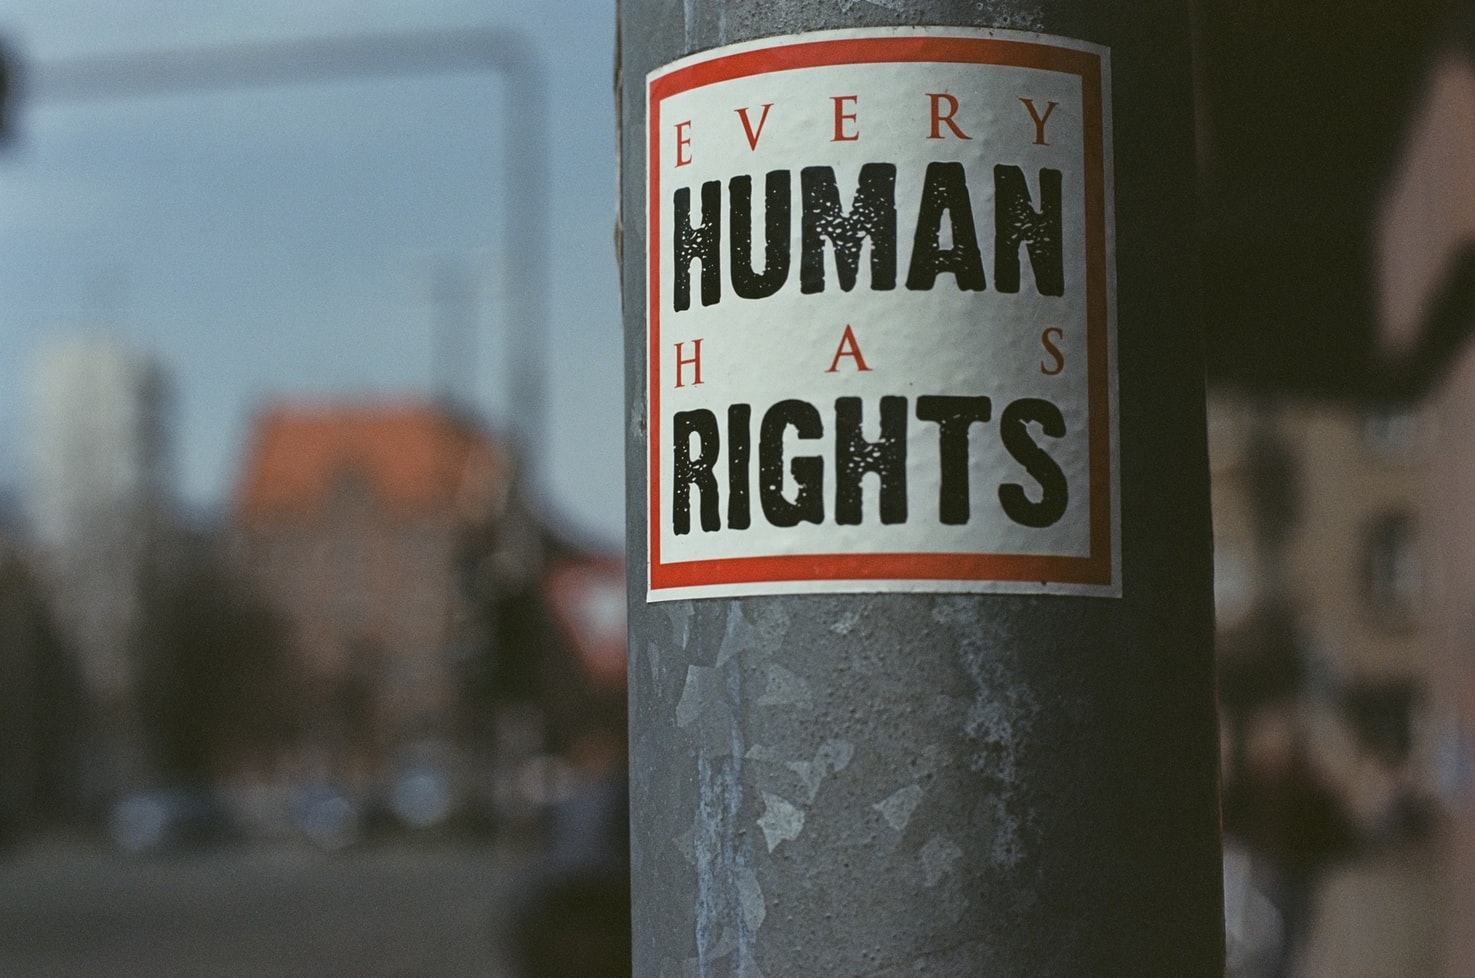 A sticker on a pole advocates for human rights